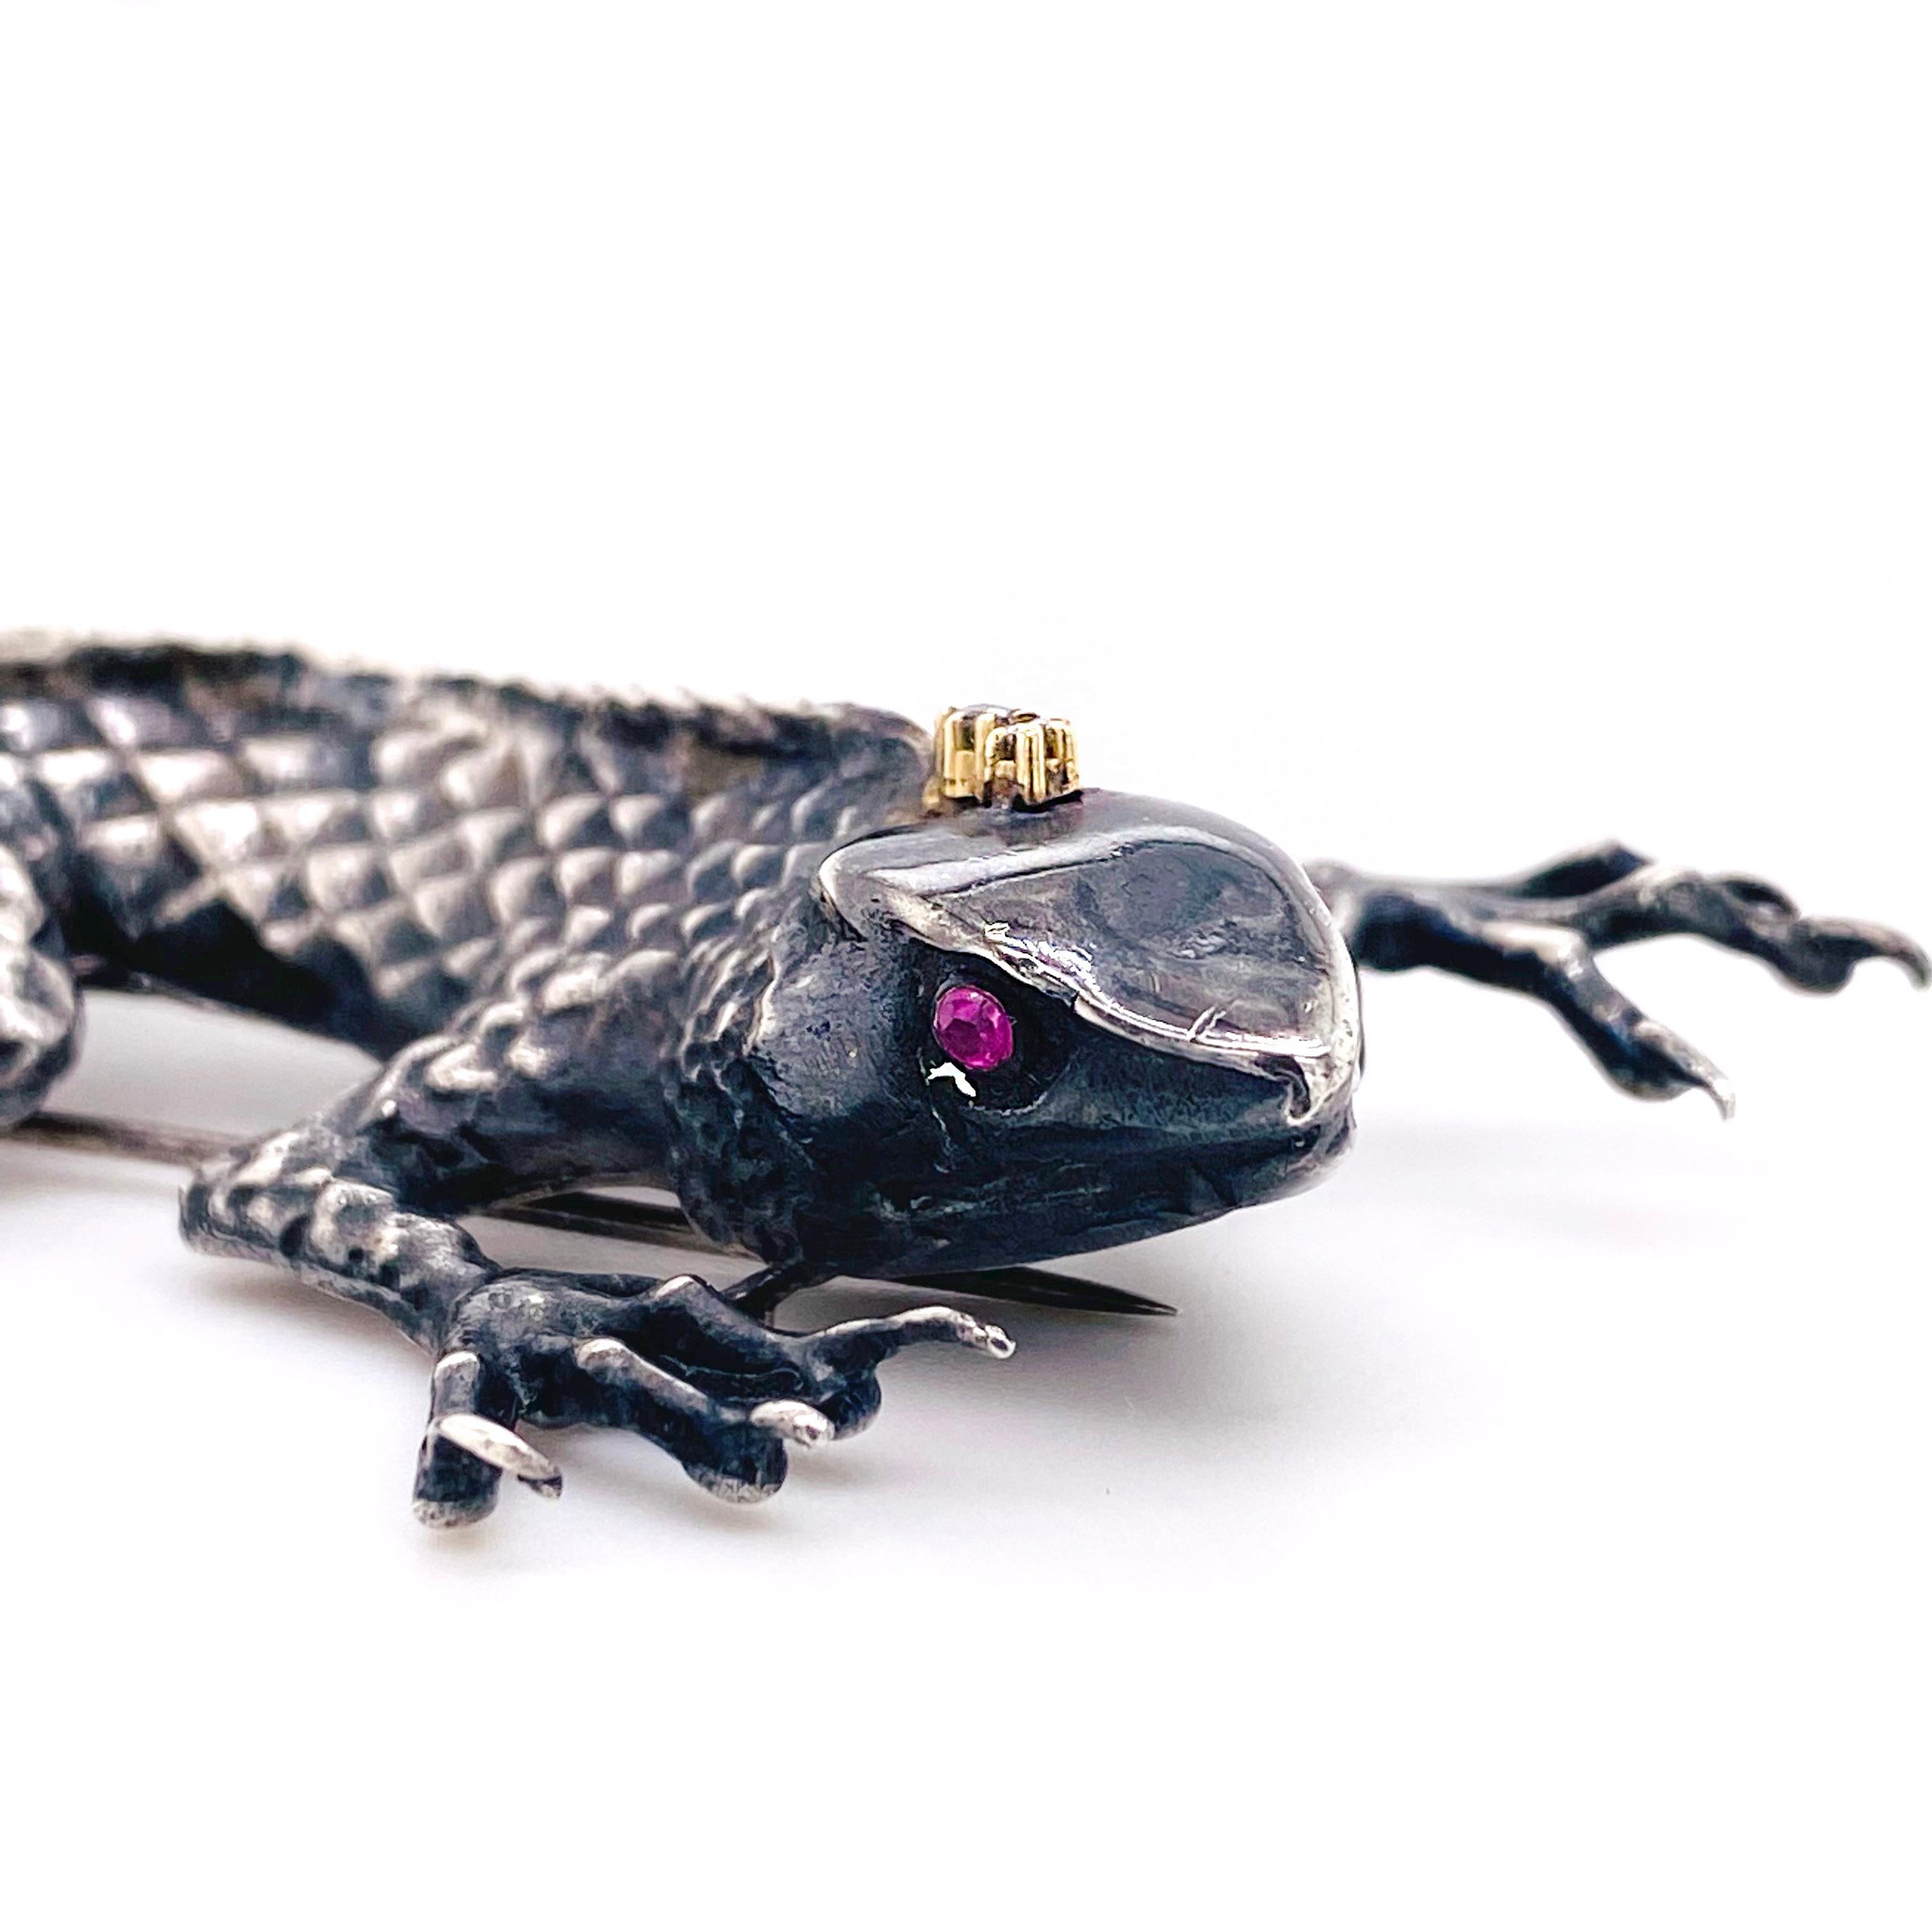 Hand crafted, one-of-a-kind sterling silver lizard. The lizard has a strong glare with rubies in its eyes and diamonds on its head! The brooch is stunning on a scarf or jacket and really is a work of art!
The details of this beautiful brooch is